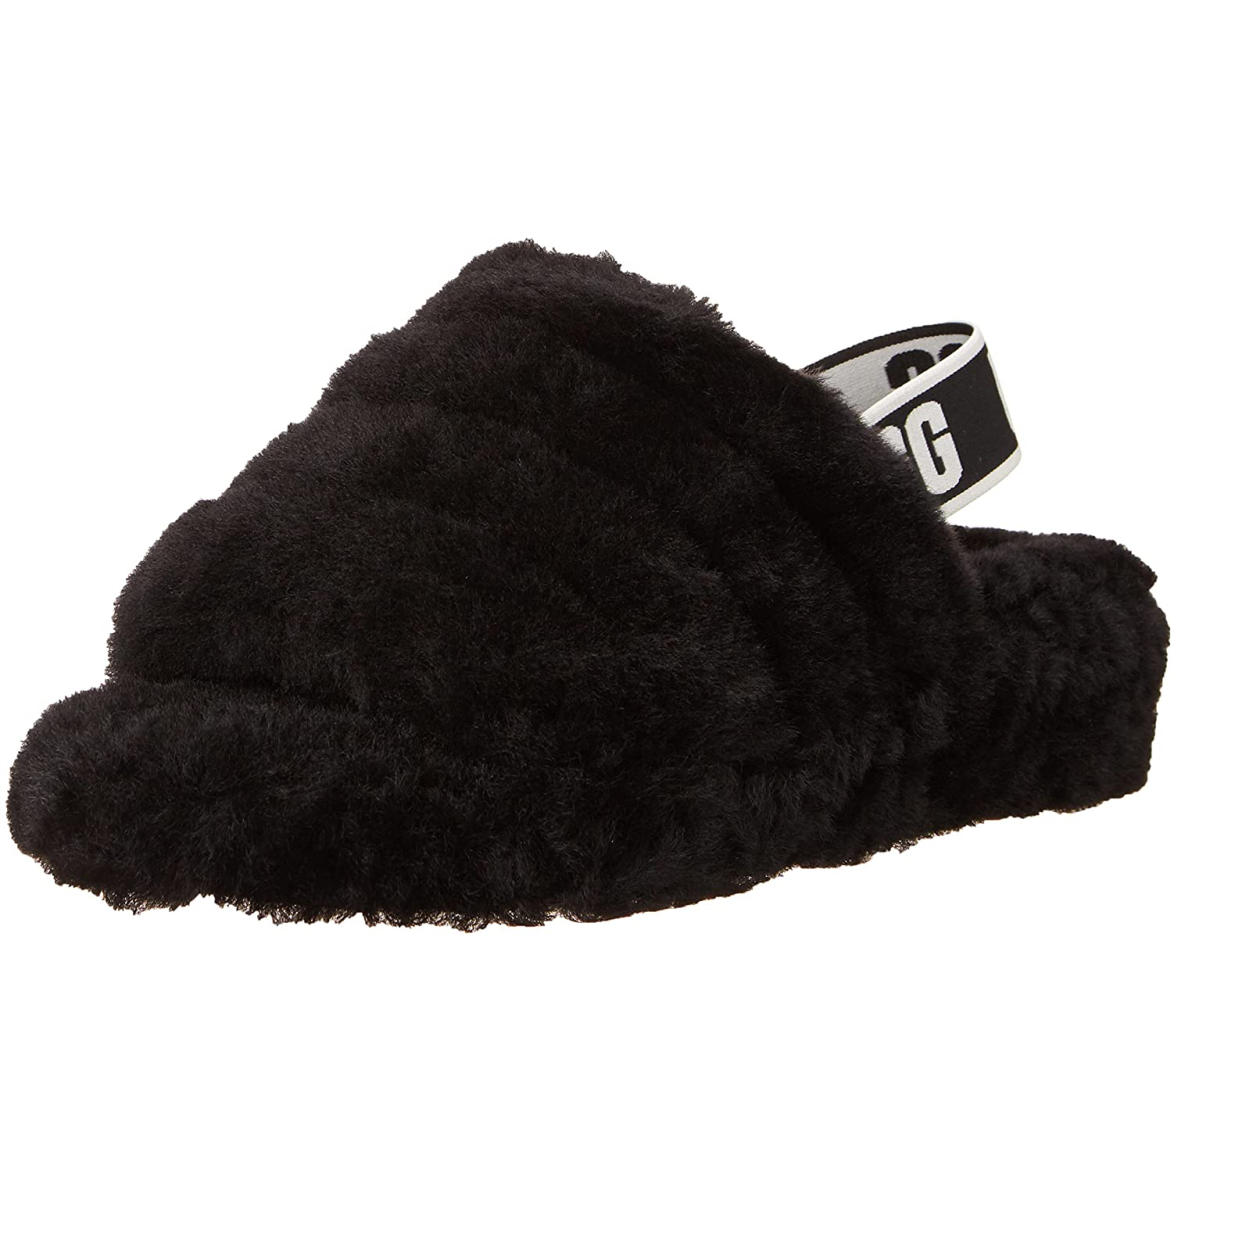 UGG fluff yeah slide slippers, gifts for mom